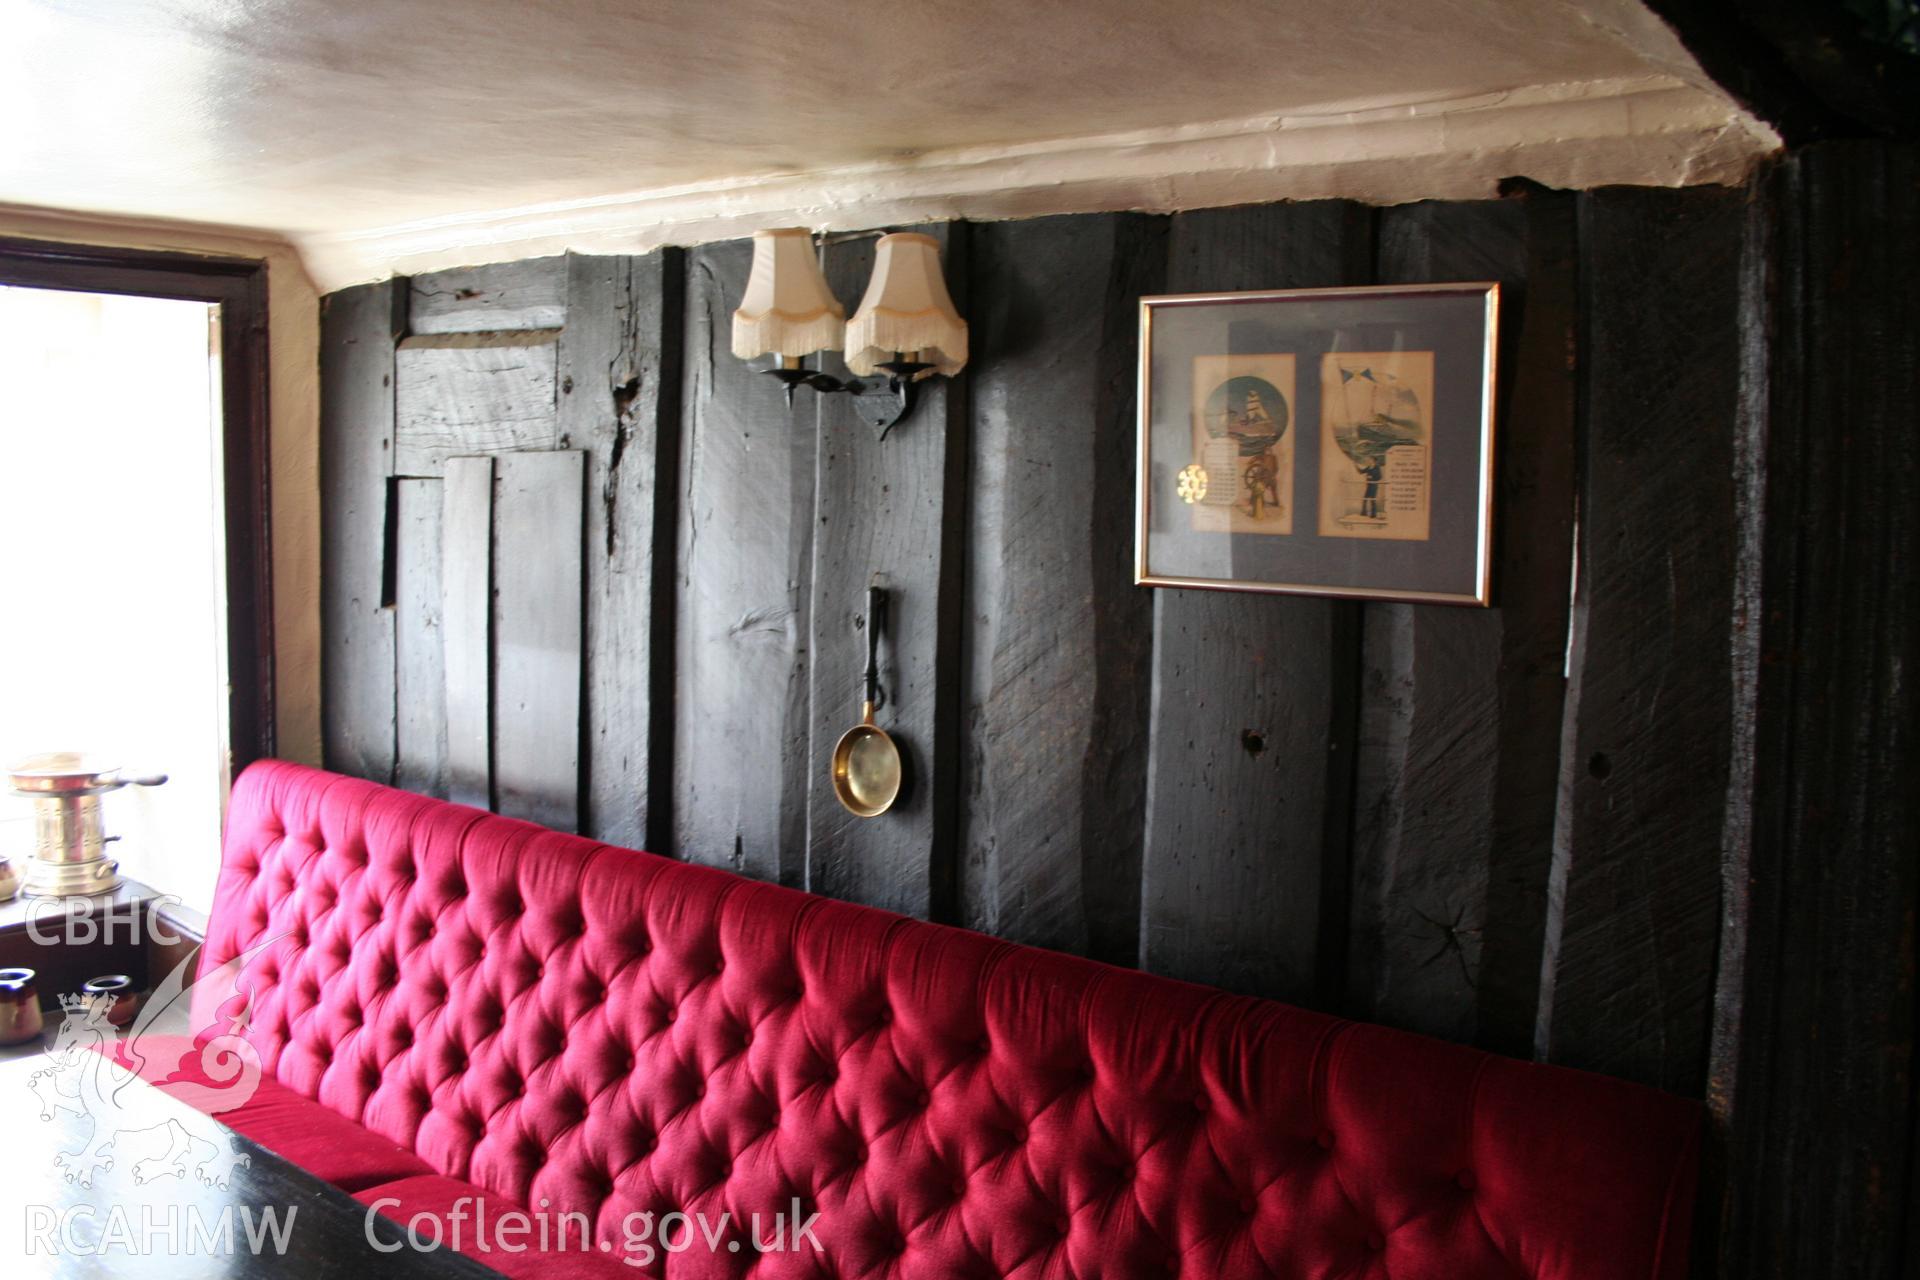 The King's Arms, Abergavenny. Interior, narrow doorway in post & panel left unit, south side.